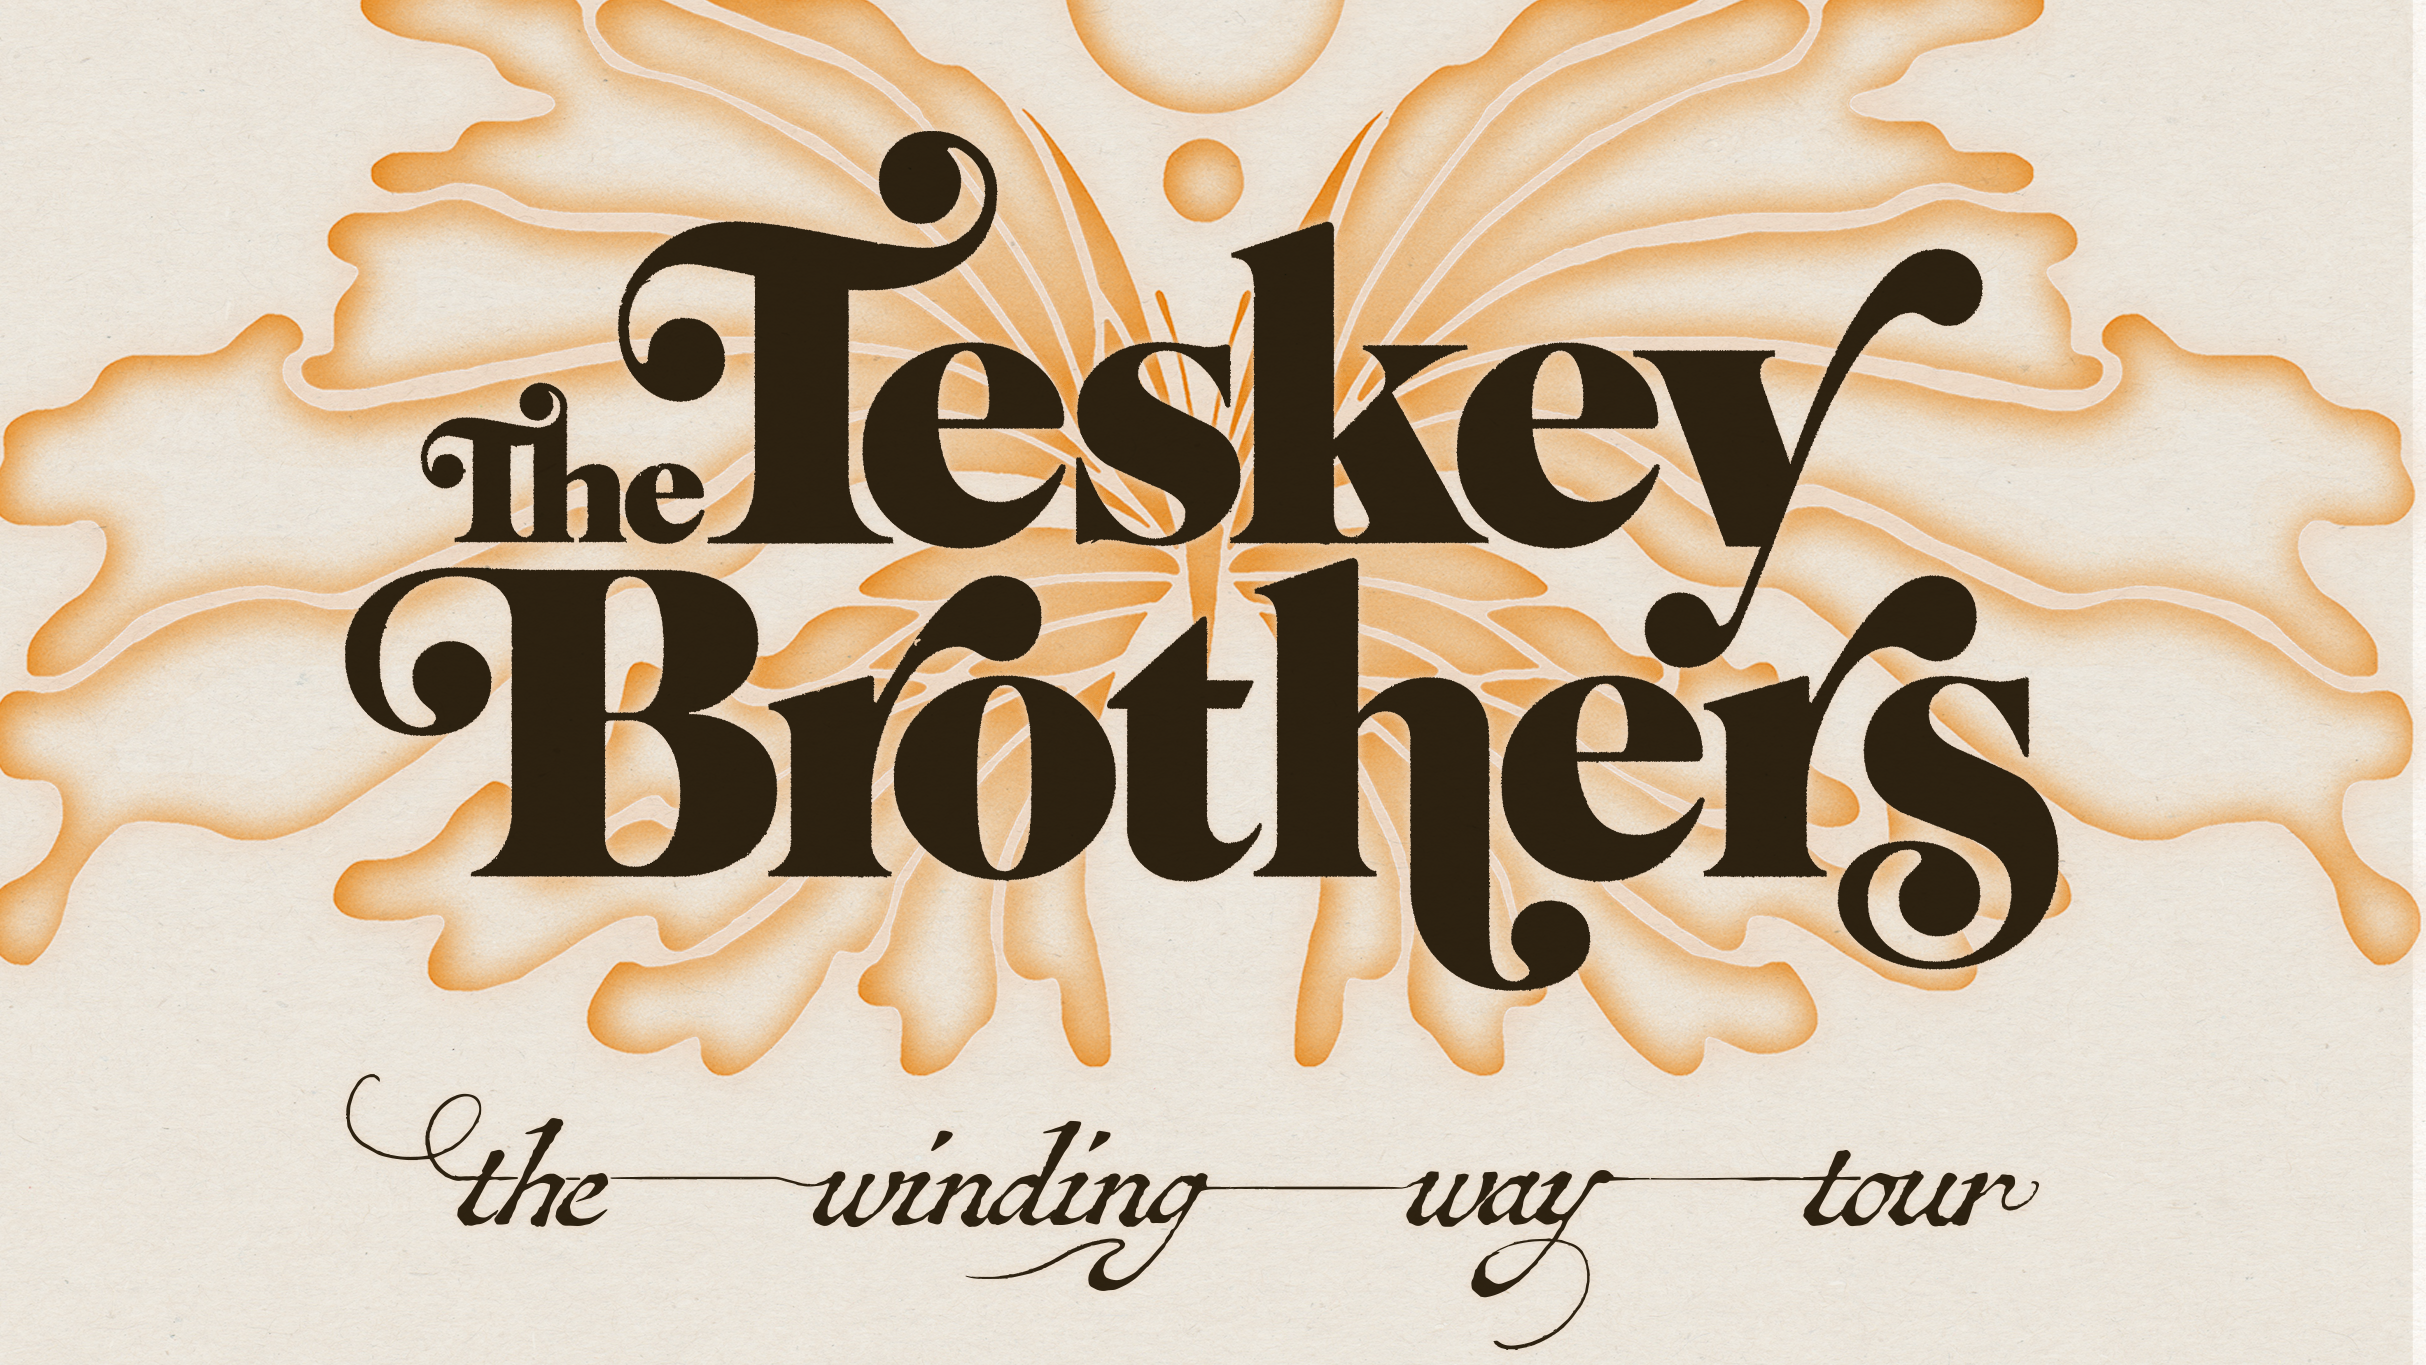 The Teskey Brothers: The Winding Way Tour in Auckland promo photo for Artist presale offer code